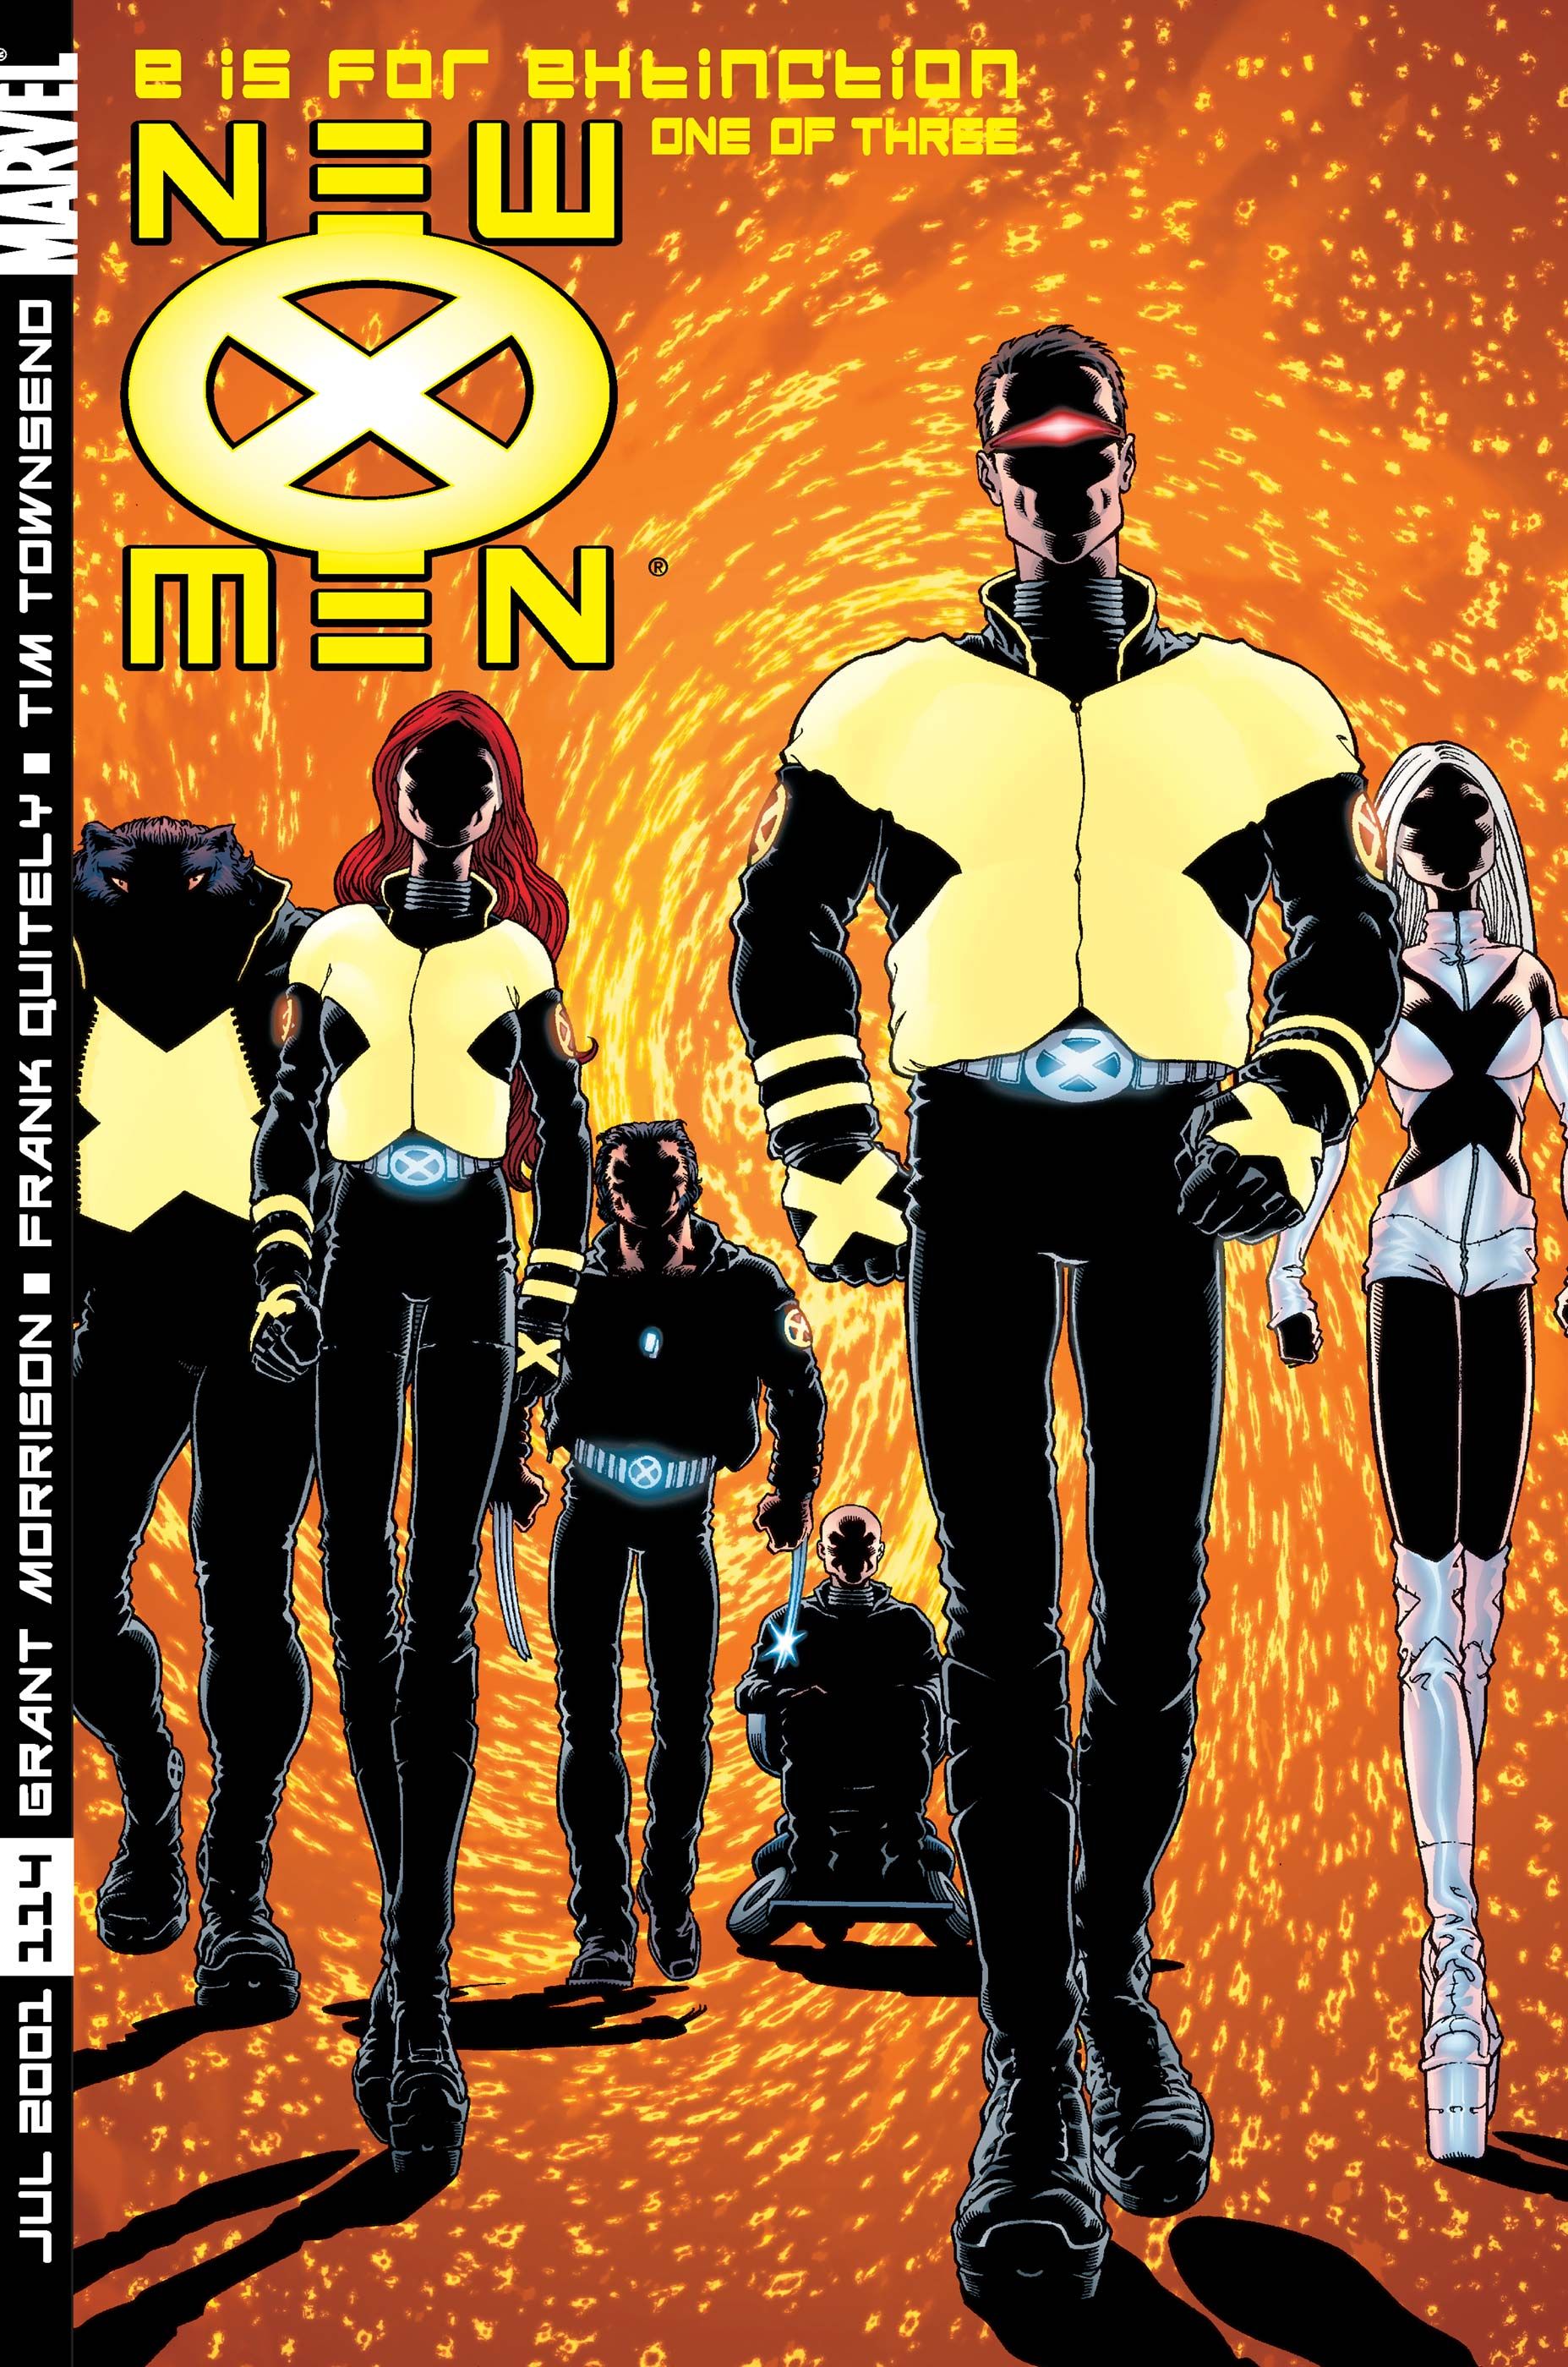 The New X-Men on Frank Quitely's cover to New X-Men #114